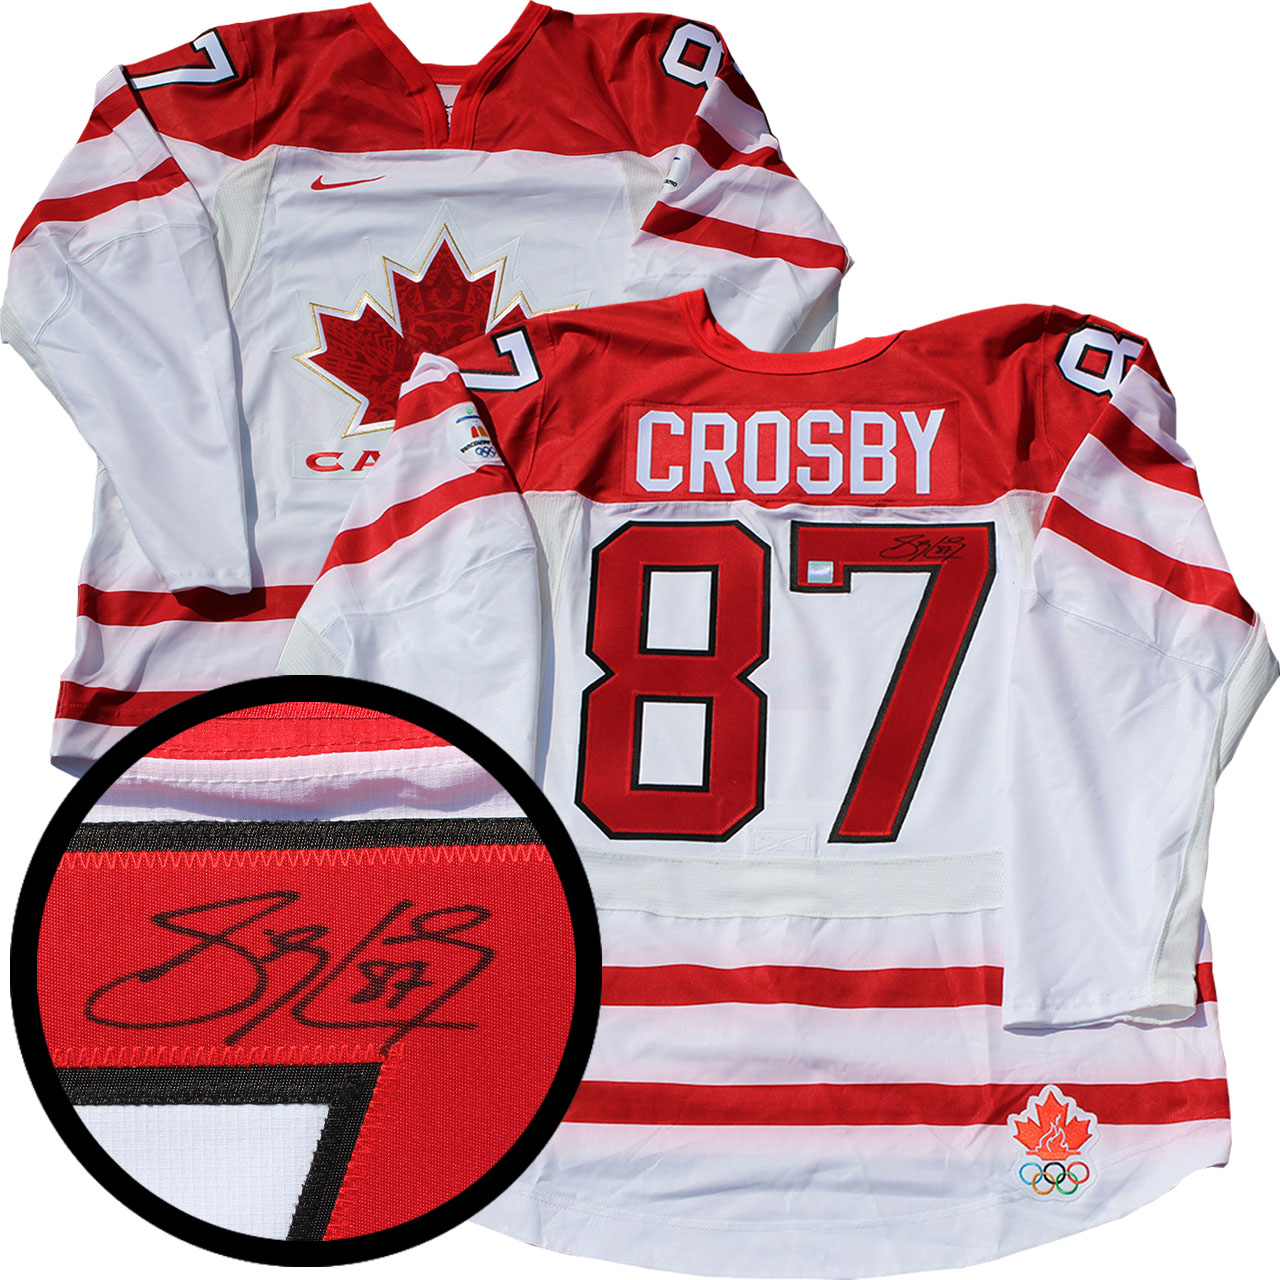 crosby signed jersey